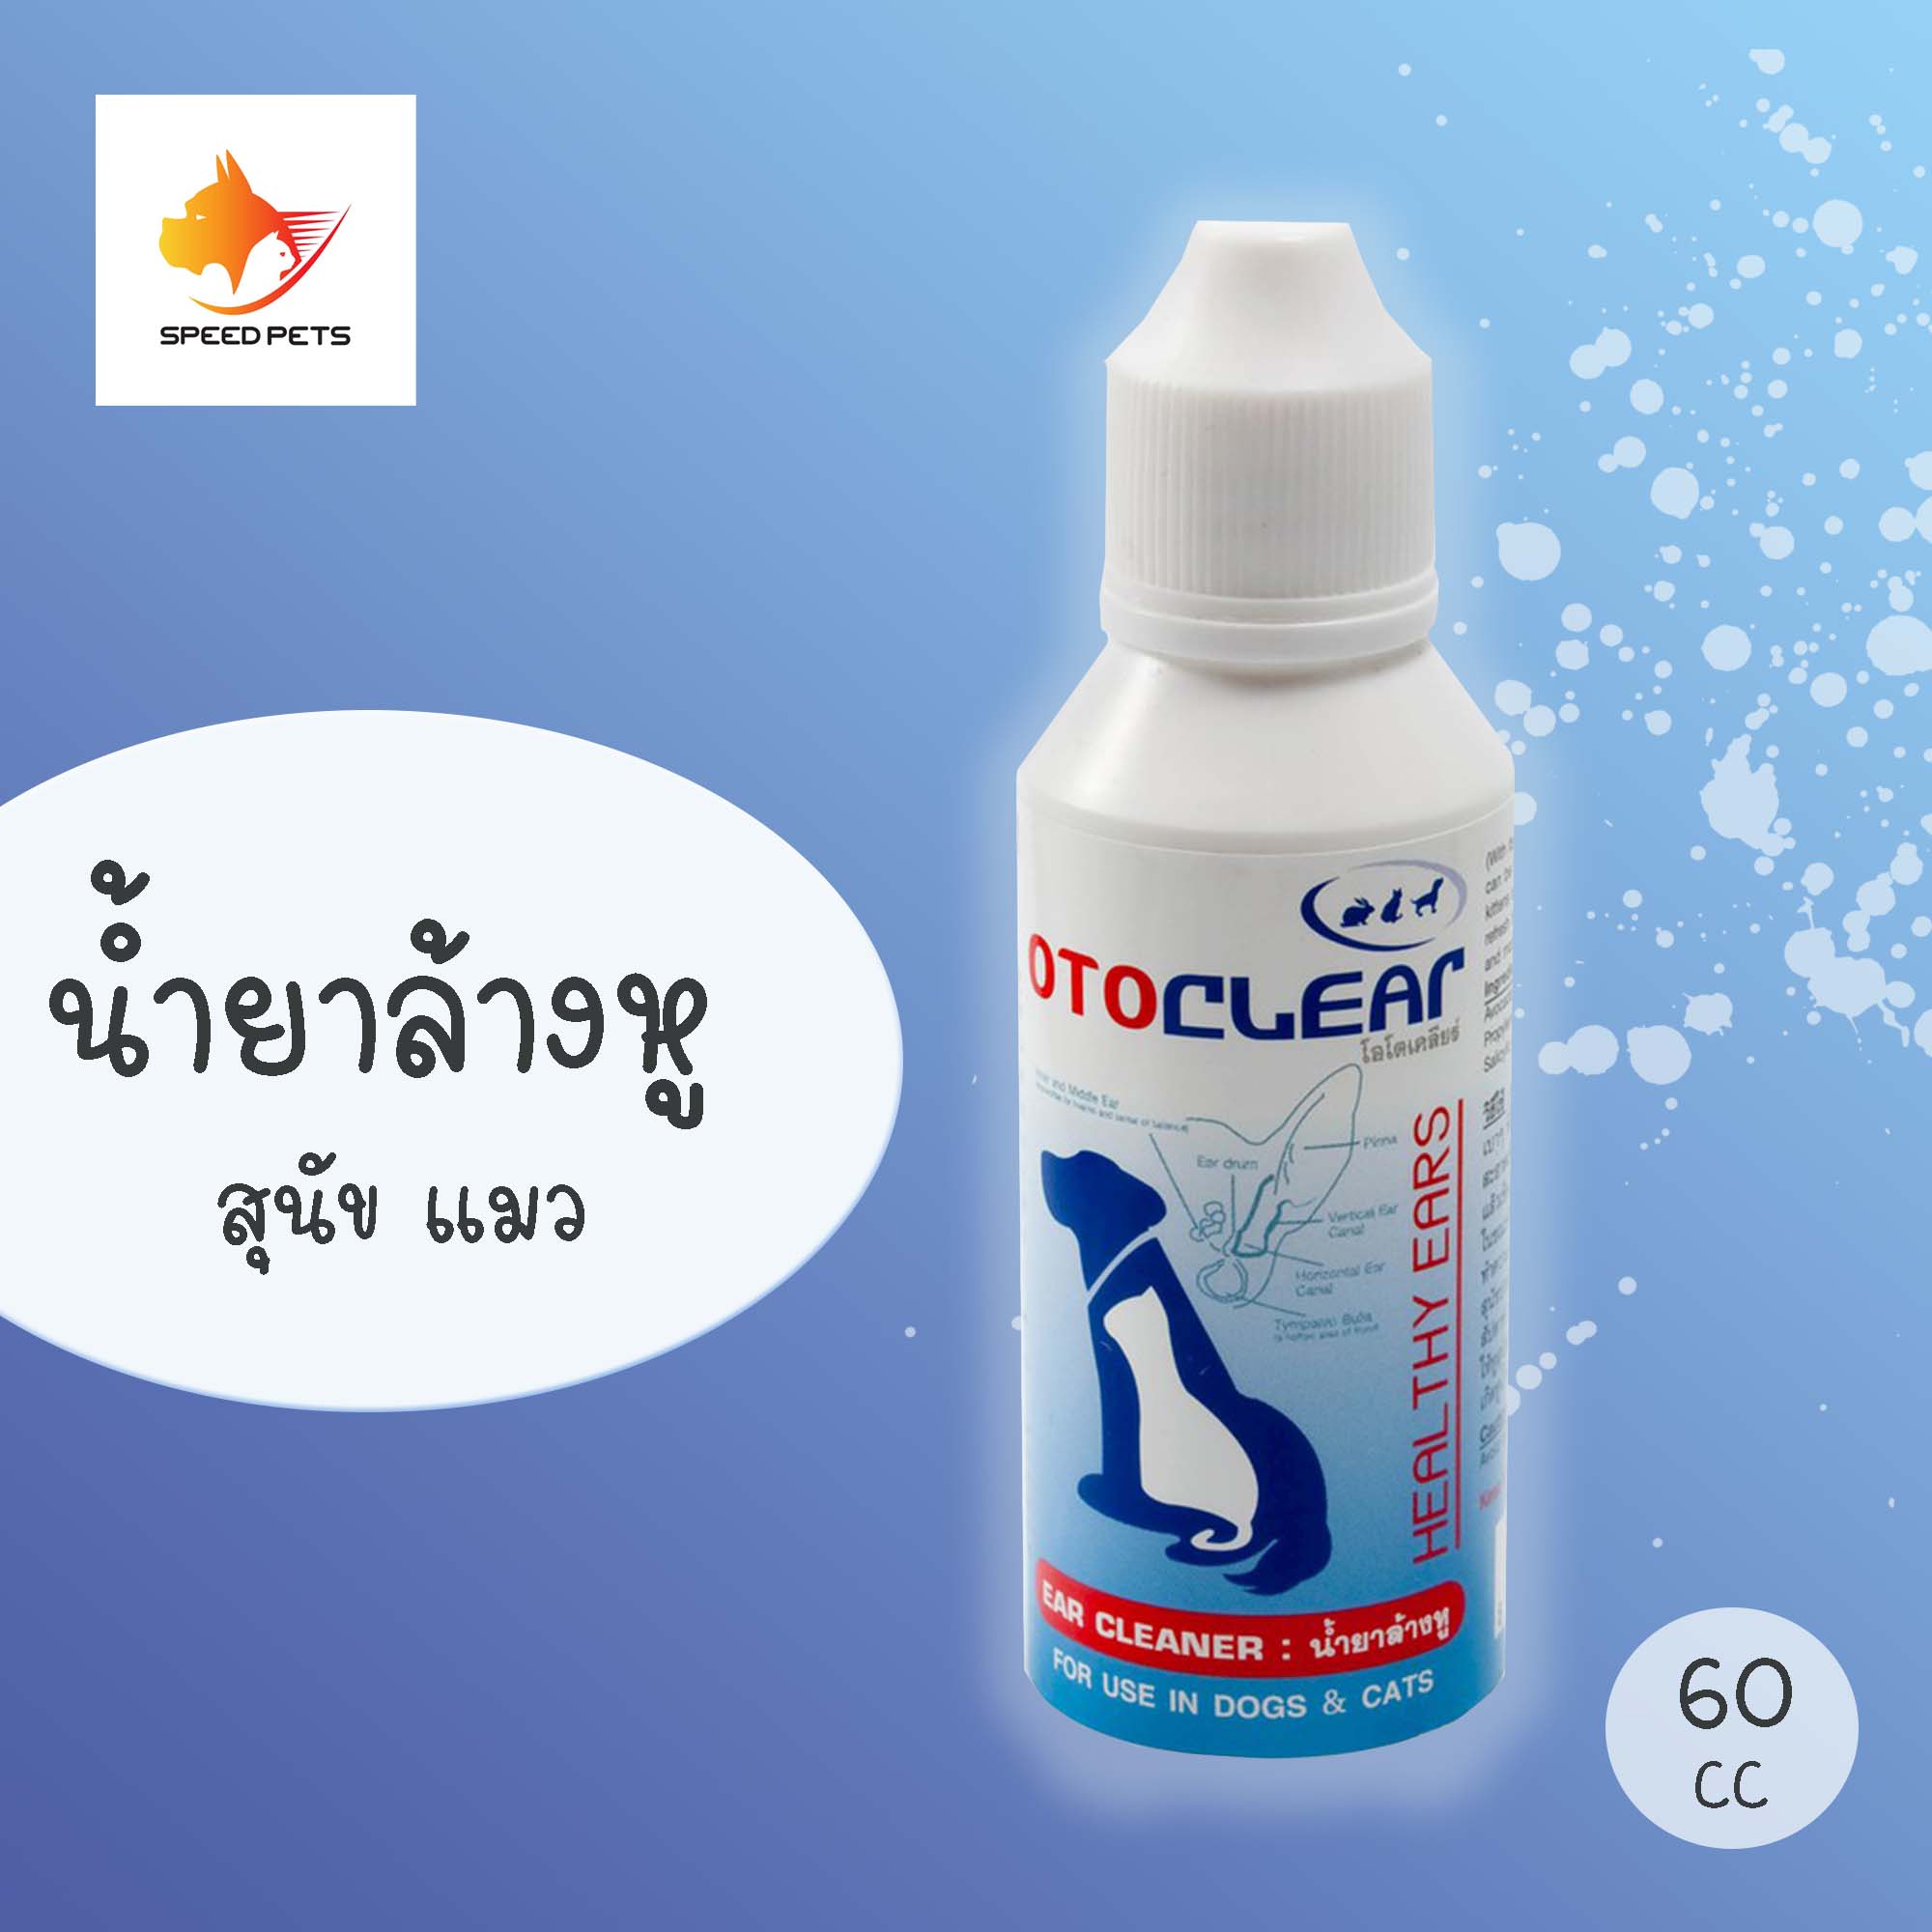 Otoclear ear cleaner for dogs and cats 60ml  น้ำยาล้างหู ล้างช่องหู สุนัข แมว ขนาด  60cc